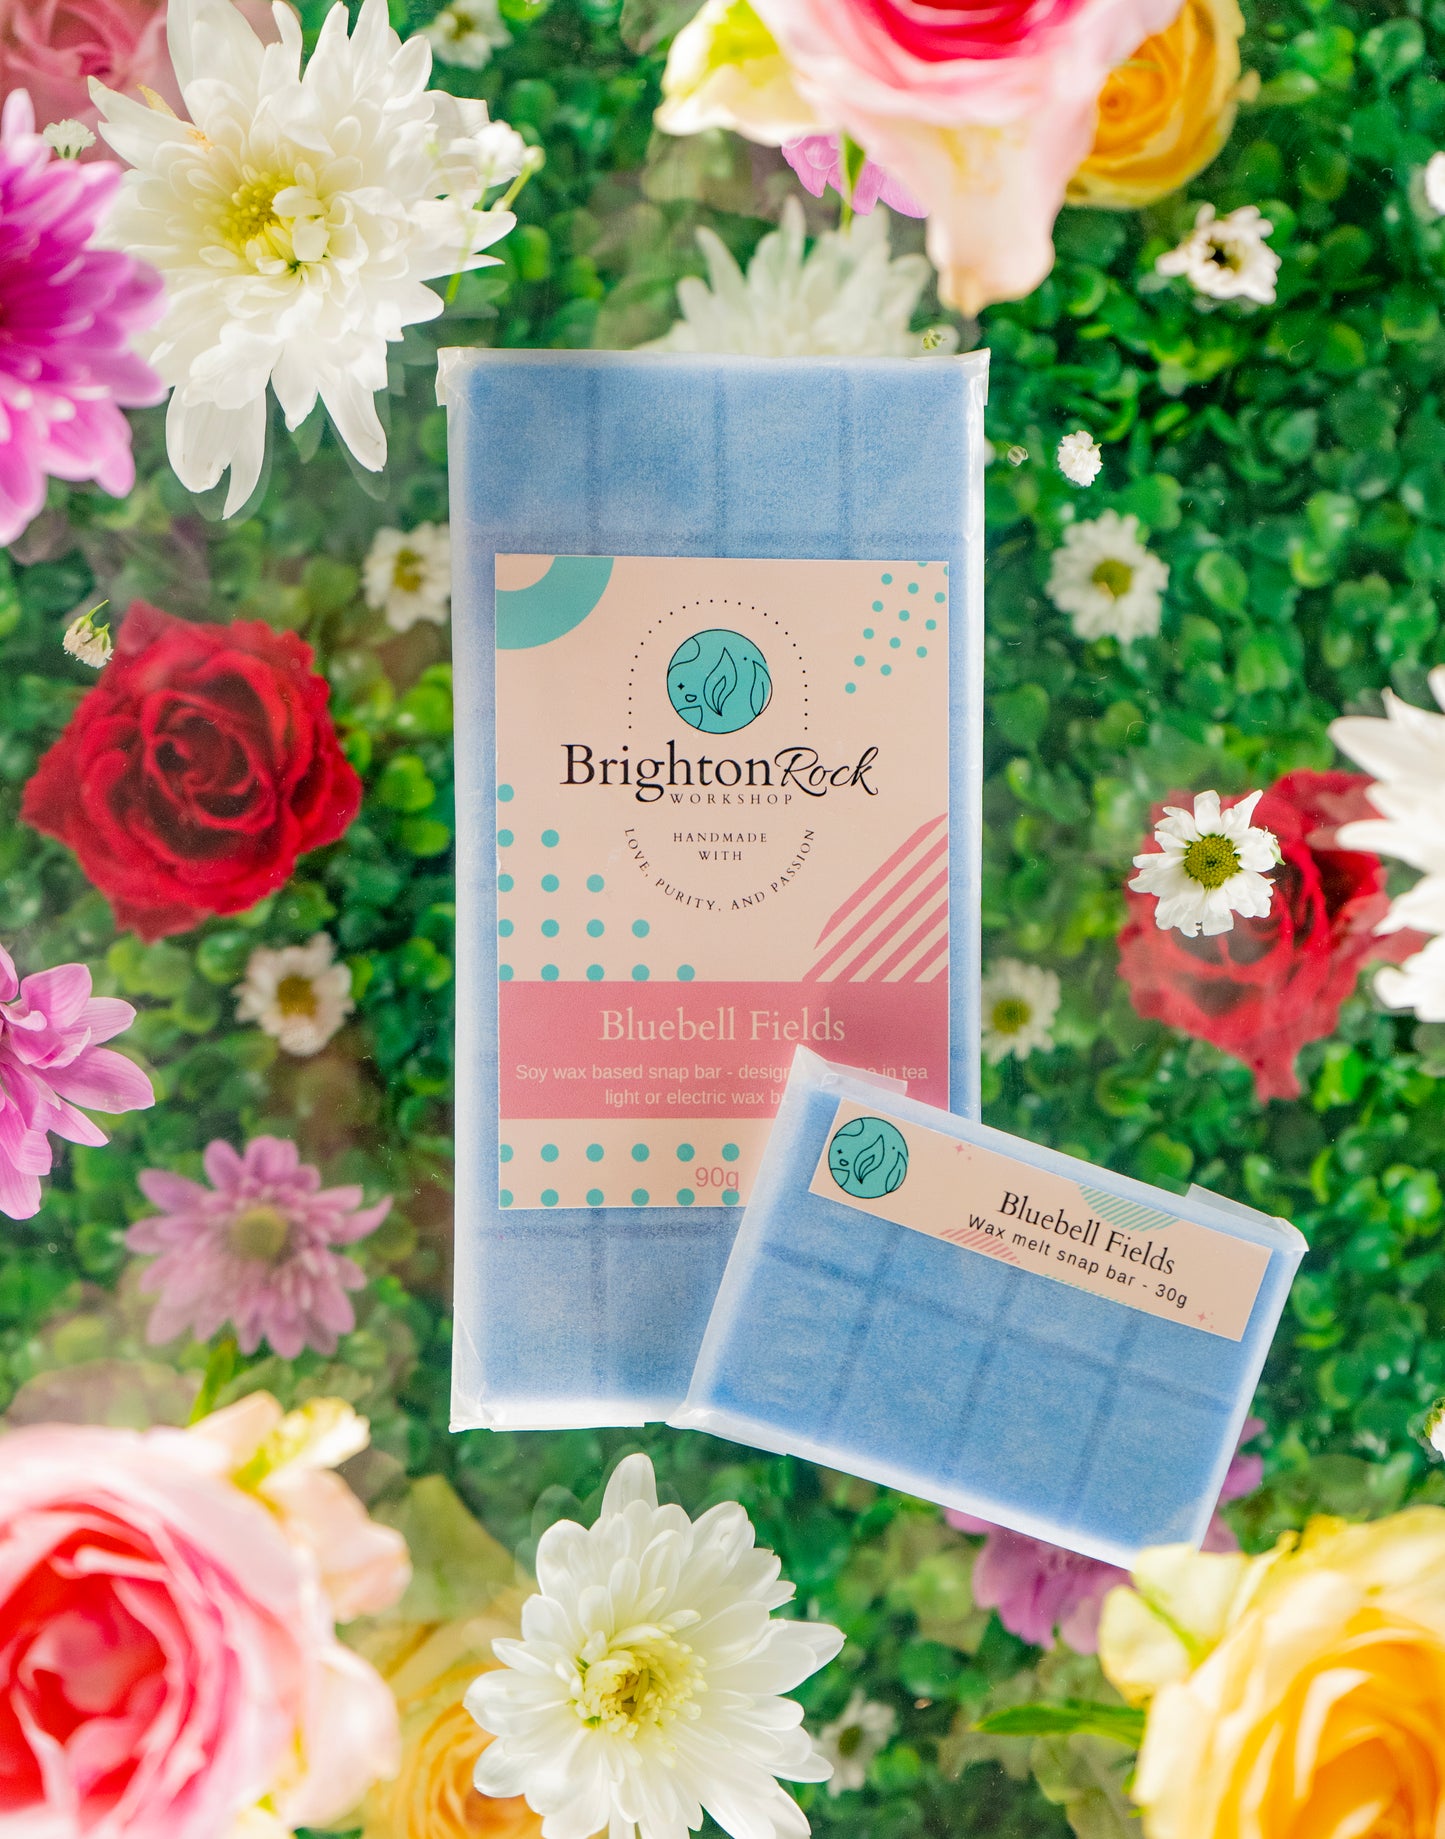 bluebell fields 30g or 90g strongly scented wax melt snap bars. Eco friendly waxed paper packaging. Brighton Rock Workshop wax melts made in Spain and the United Kingdom, available in two sizes. Suitable for tea light or electric burners